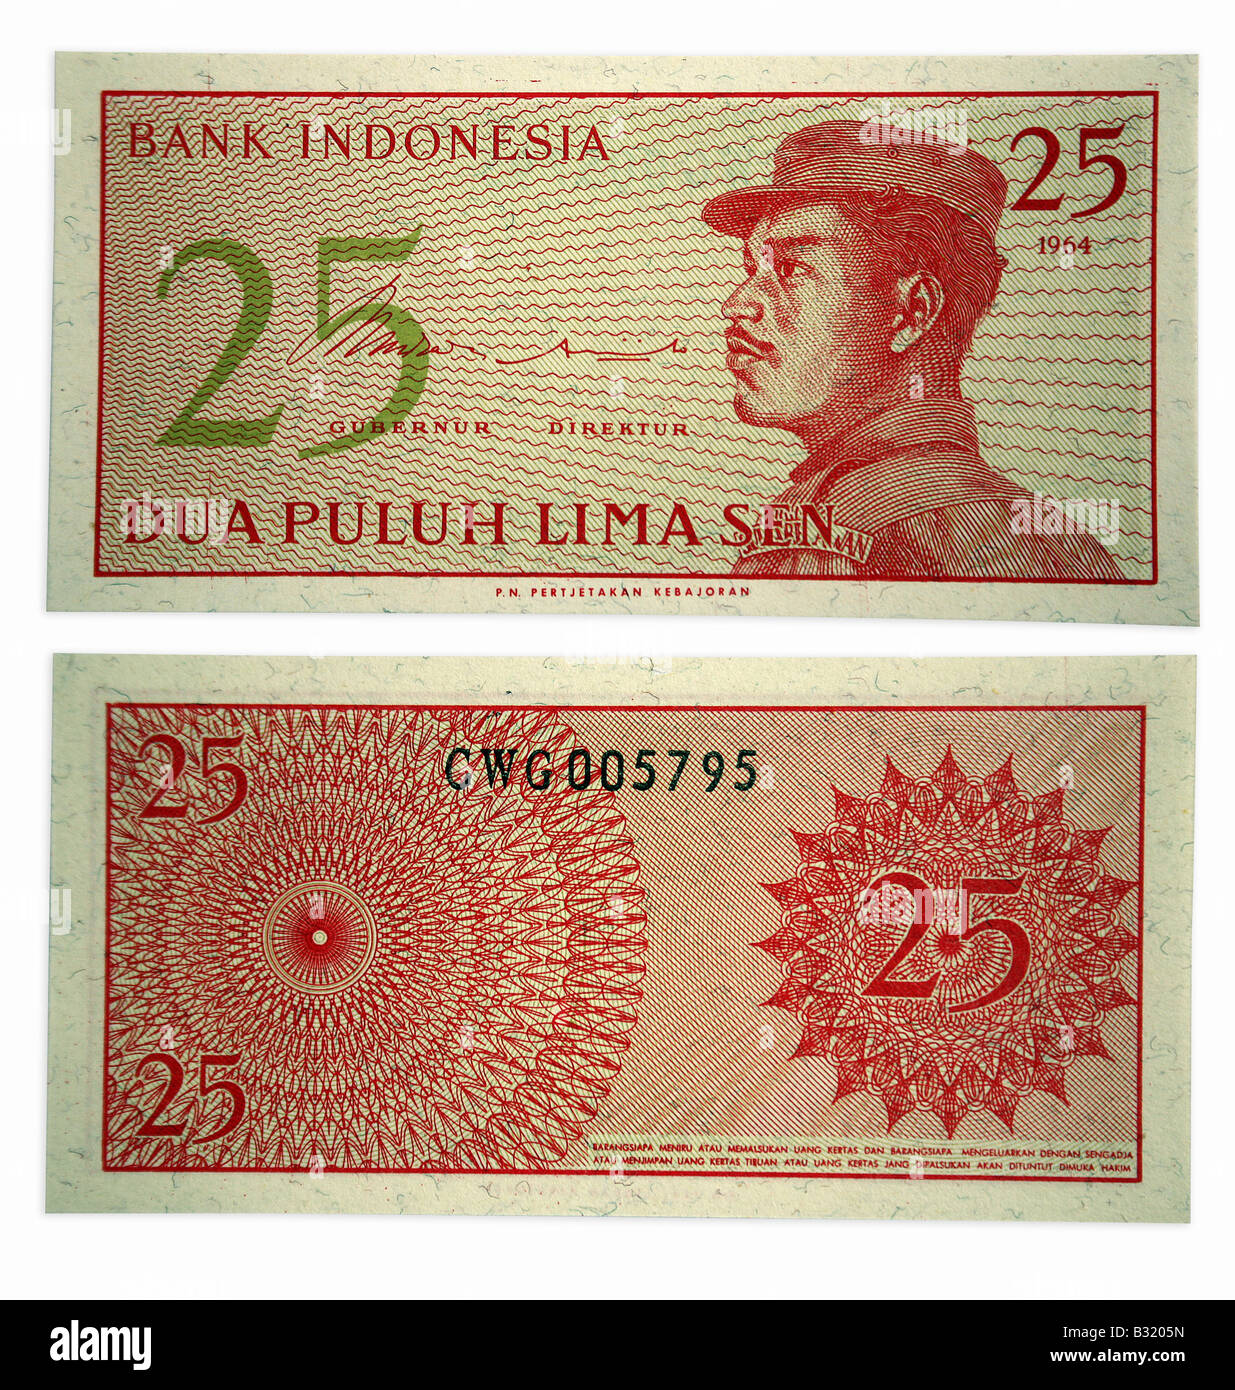 Rupiah Currency Bank notes from Indonesia 25 Rupiah Stock Photo